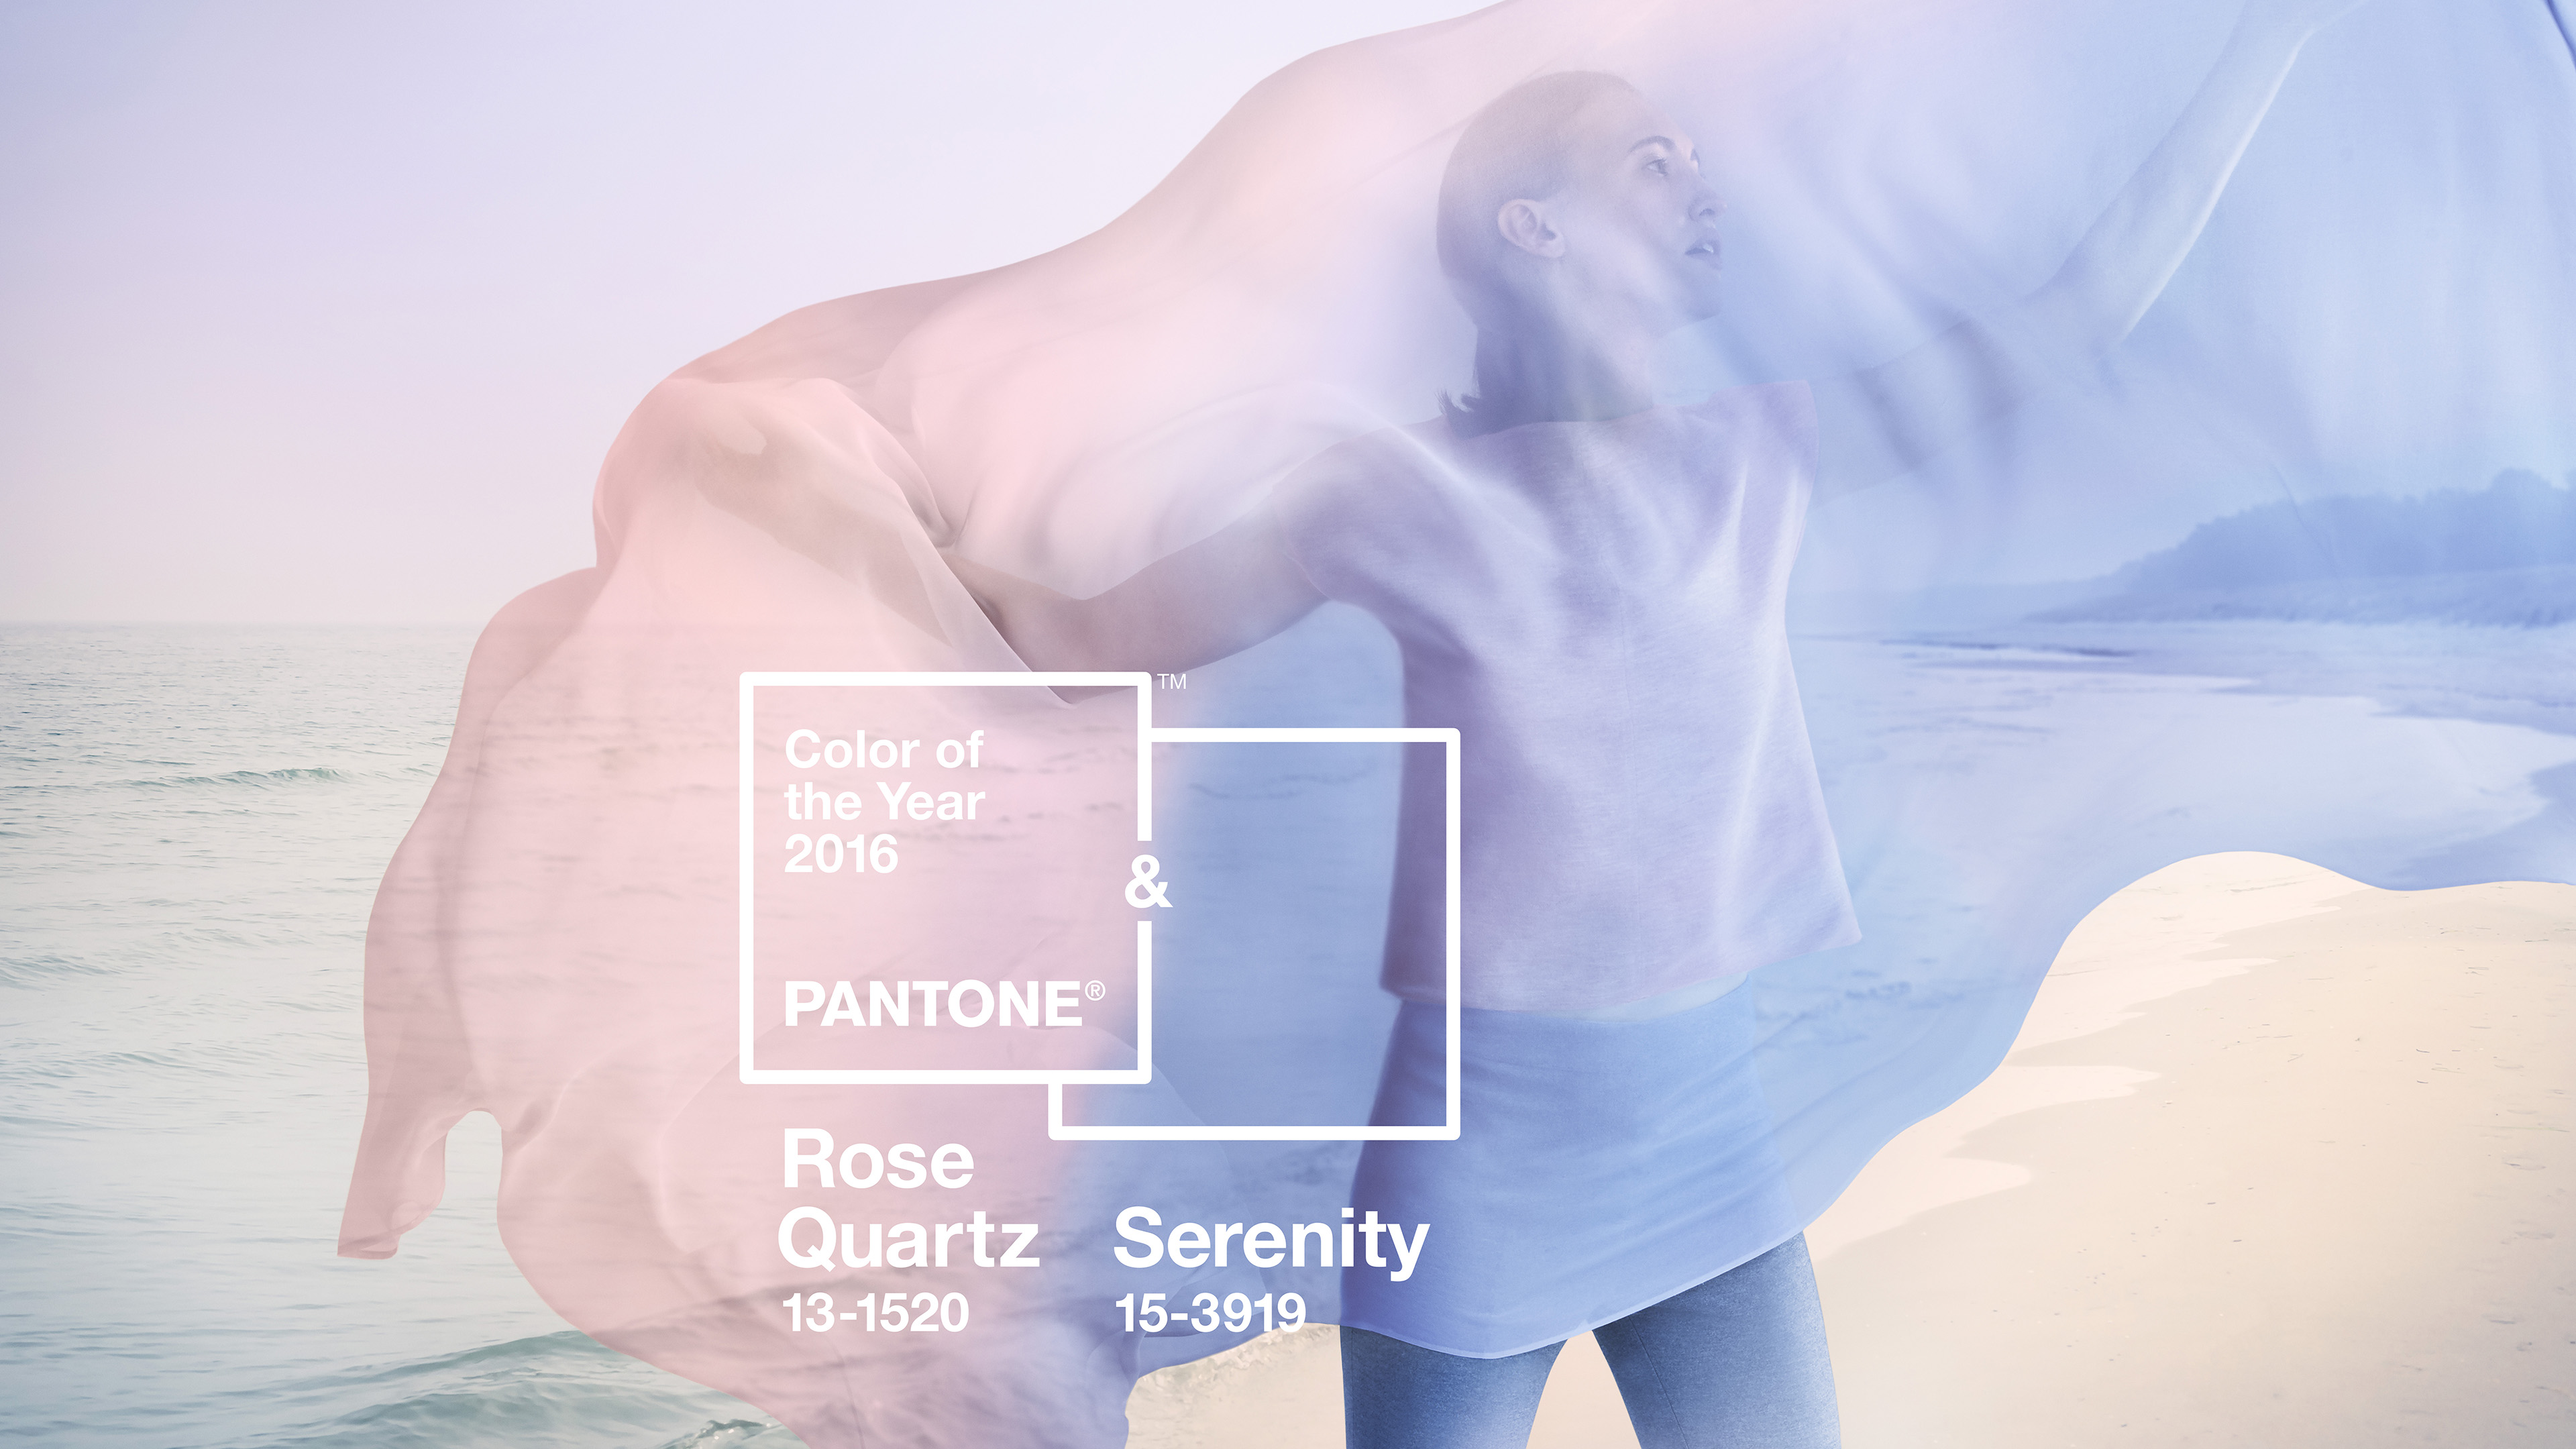 PANTONE-Color-of-the-Year-2016-v4-3840x2160